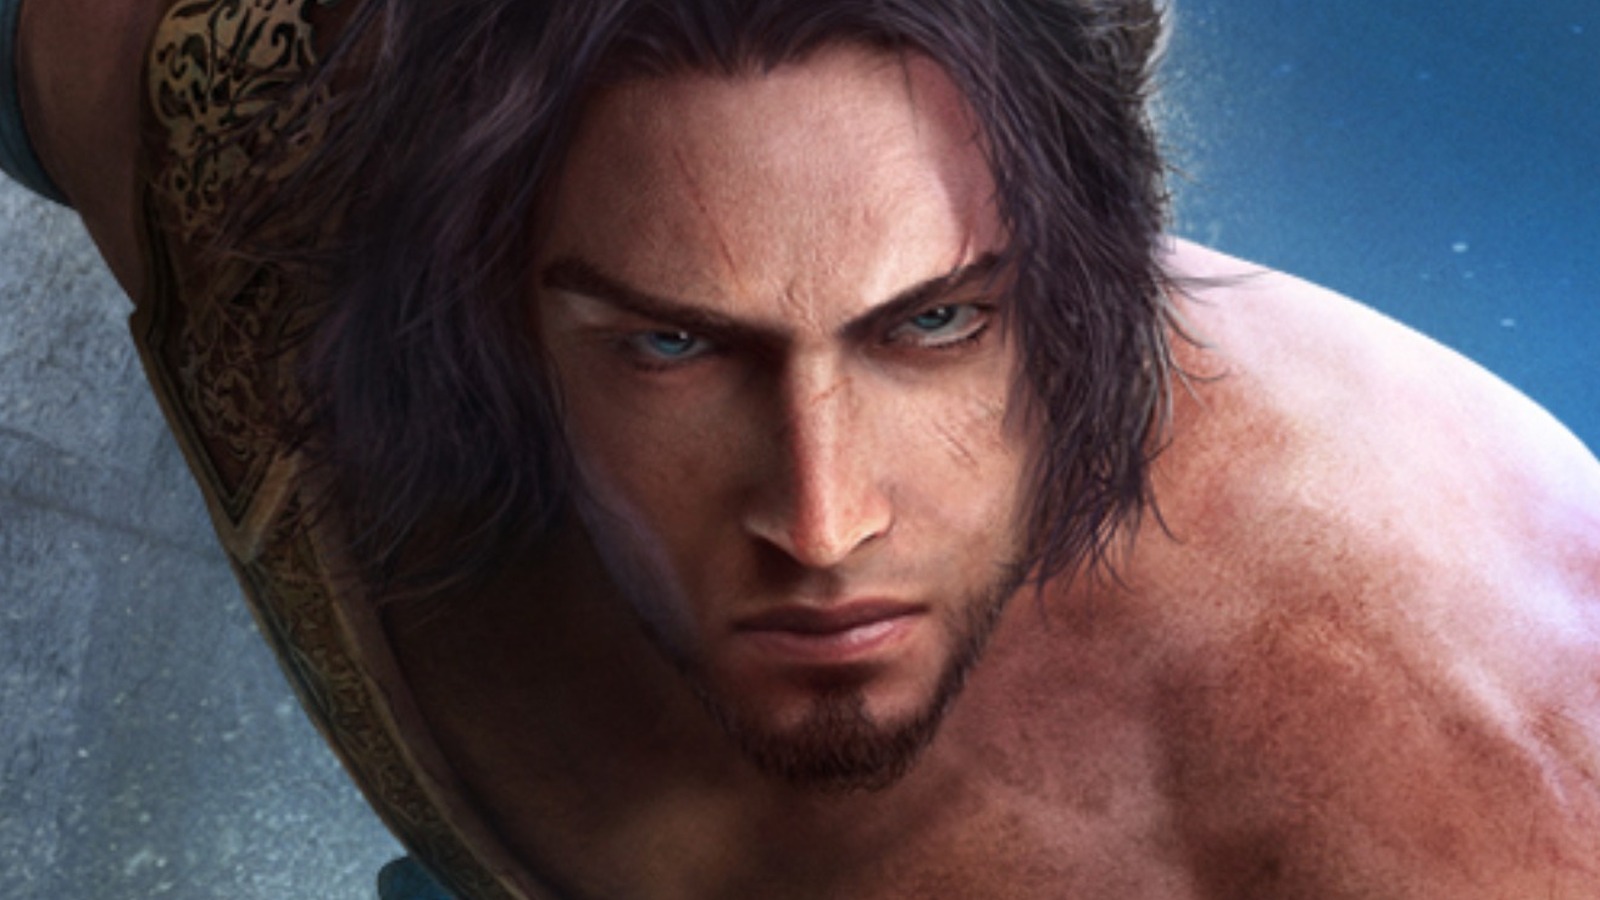 The Prince Of Persia: Sands Of Time remake isn't cancelled, but